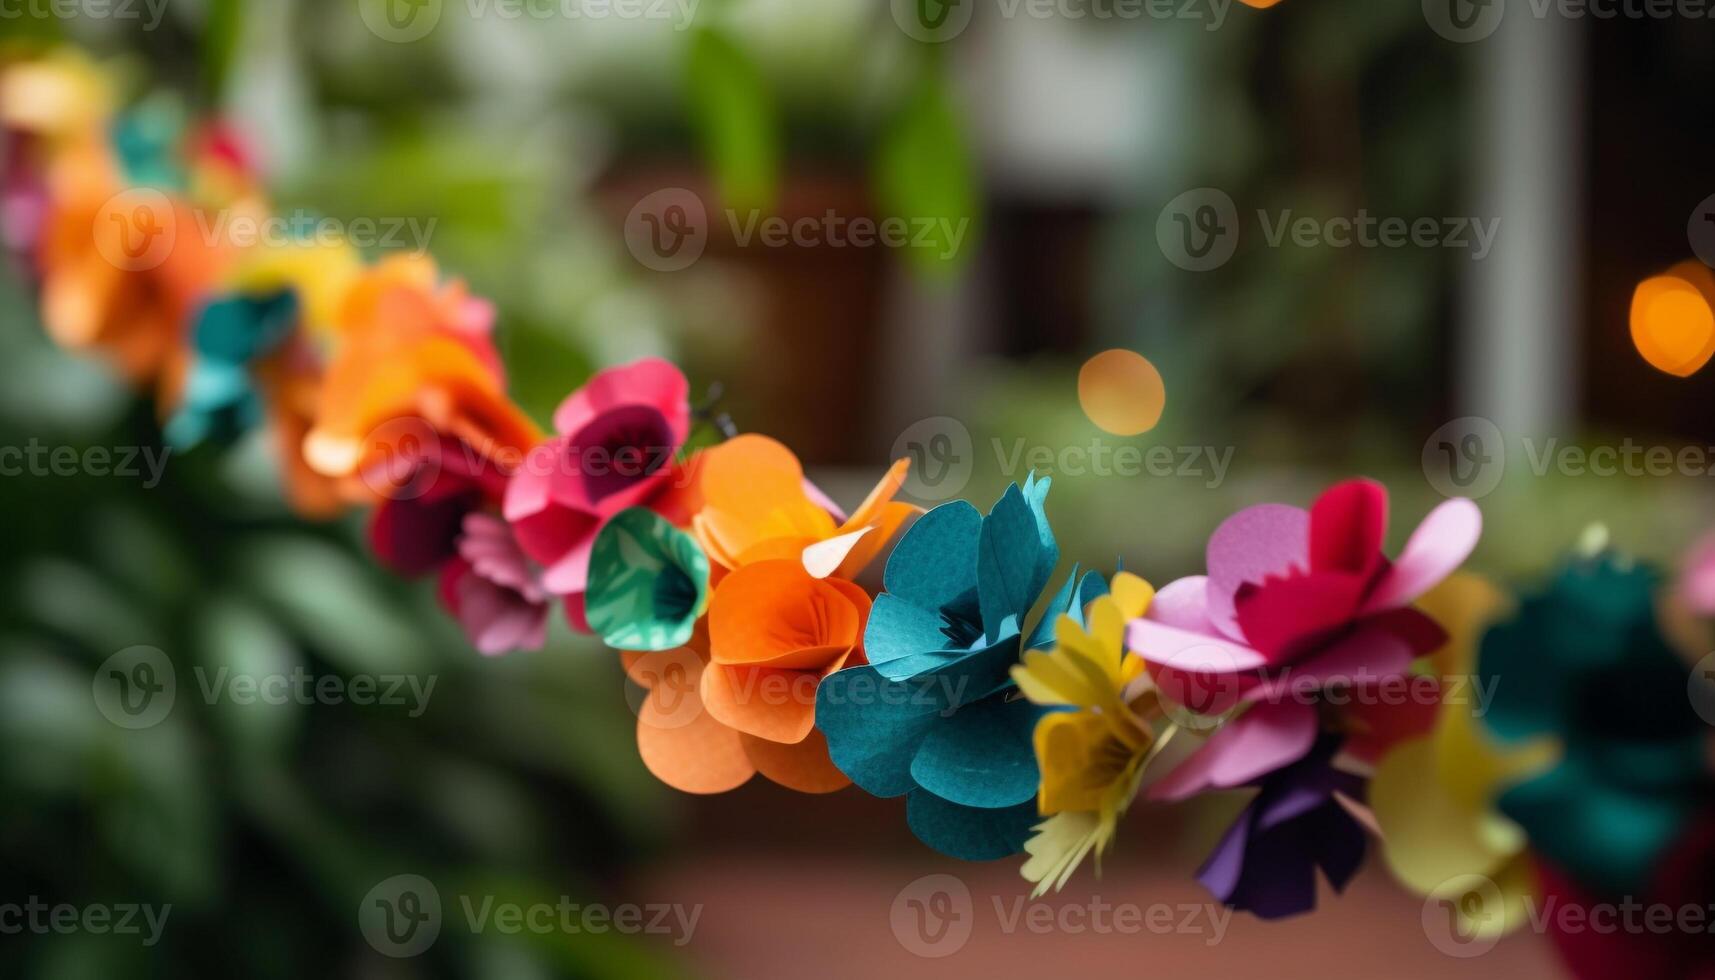 Vibrant colors of nature in a bouquet generated by AI photo